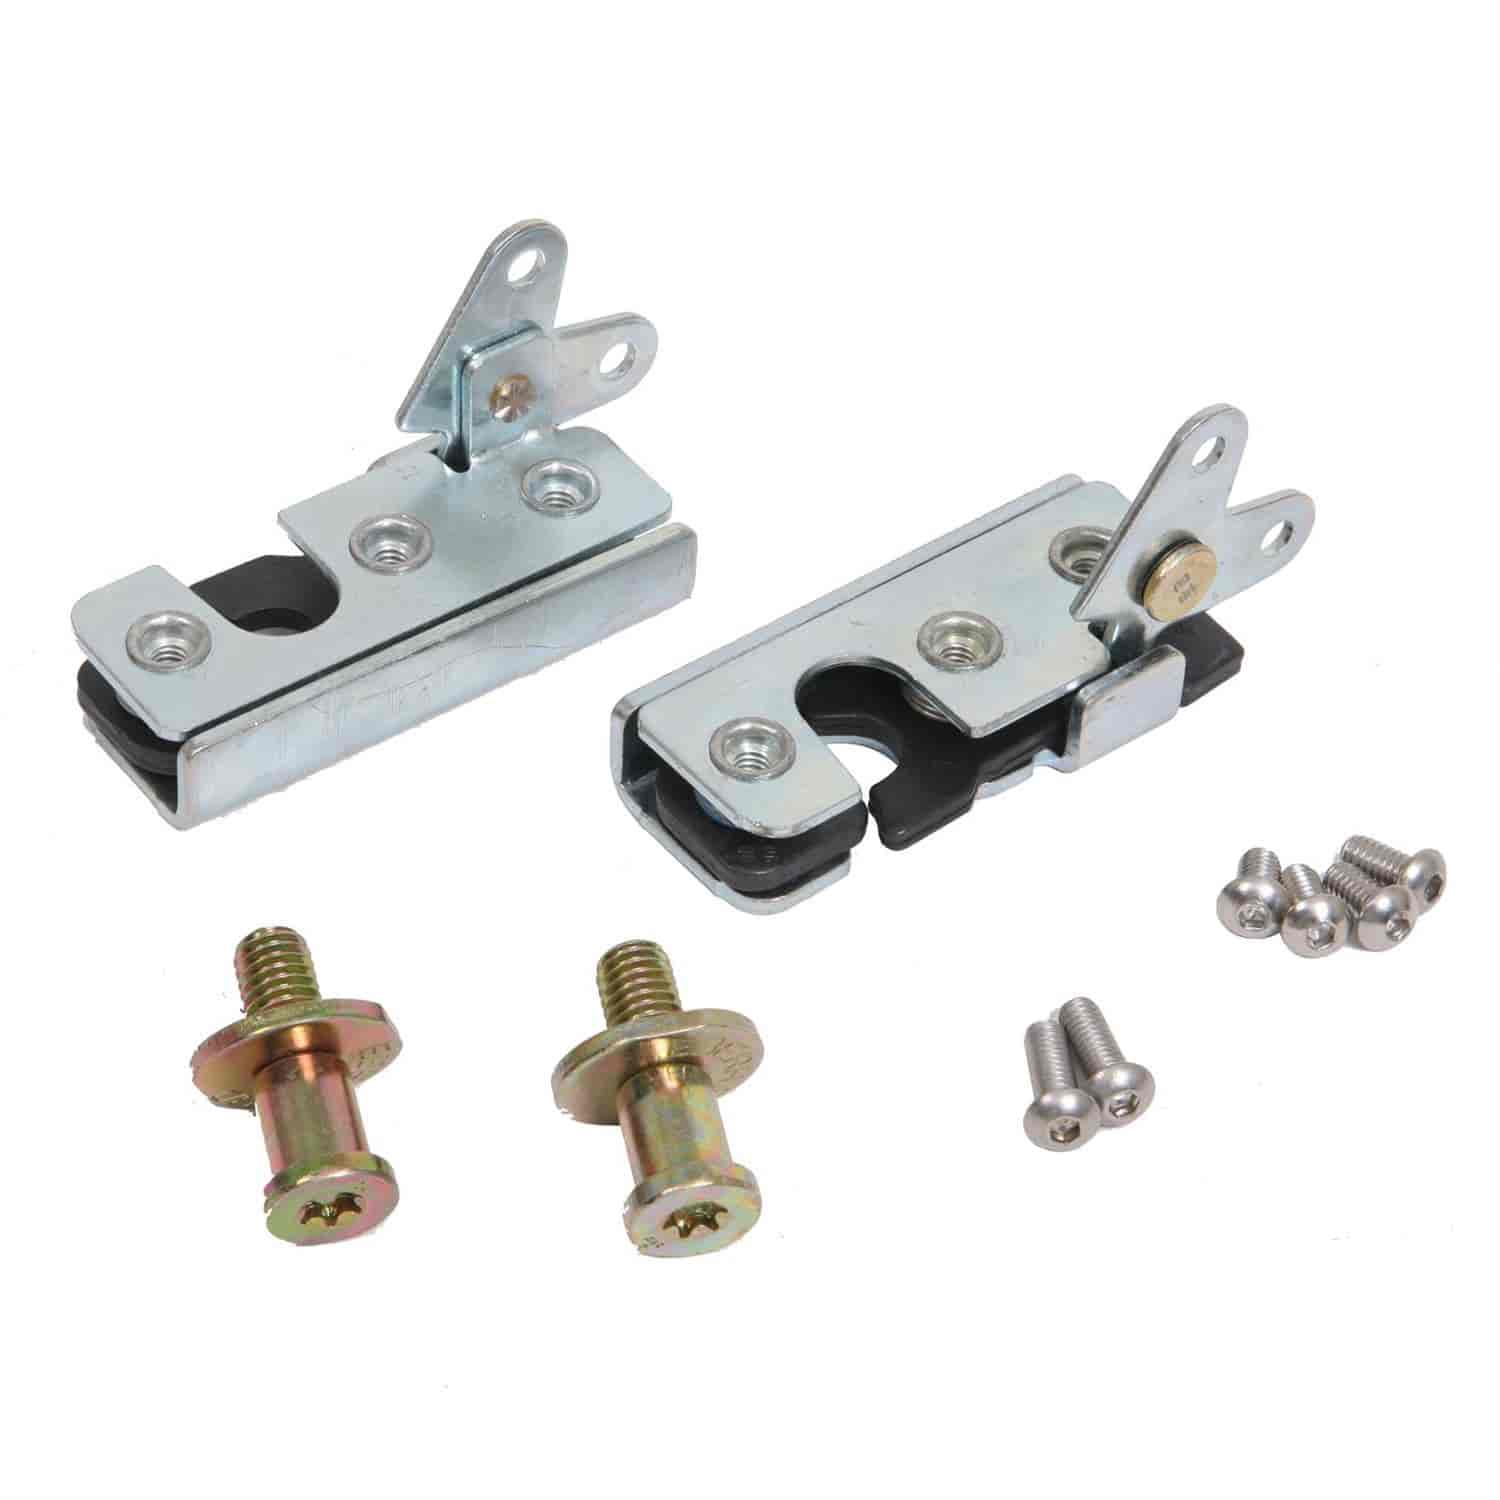 Manual Claw Latch Can be Used on Almost Any Vehicle or Trunk